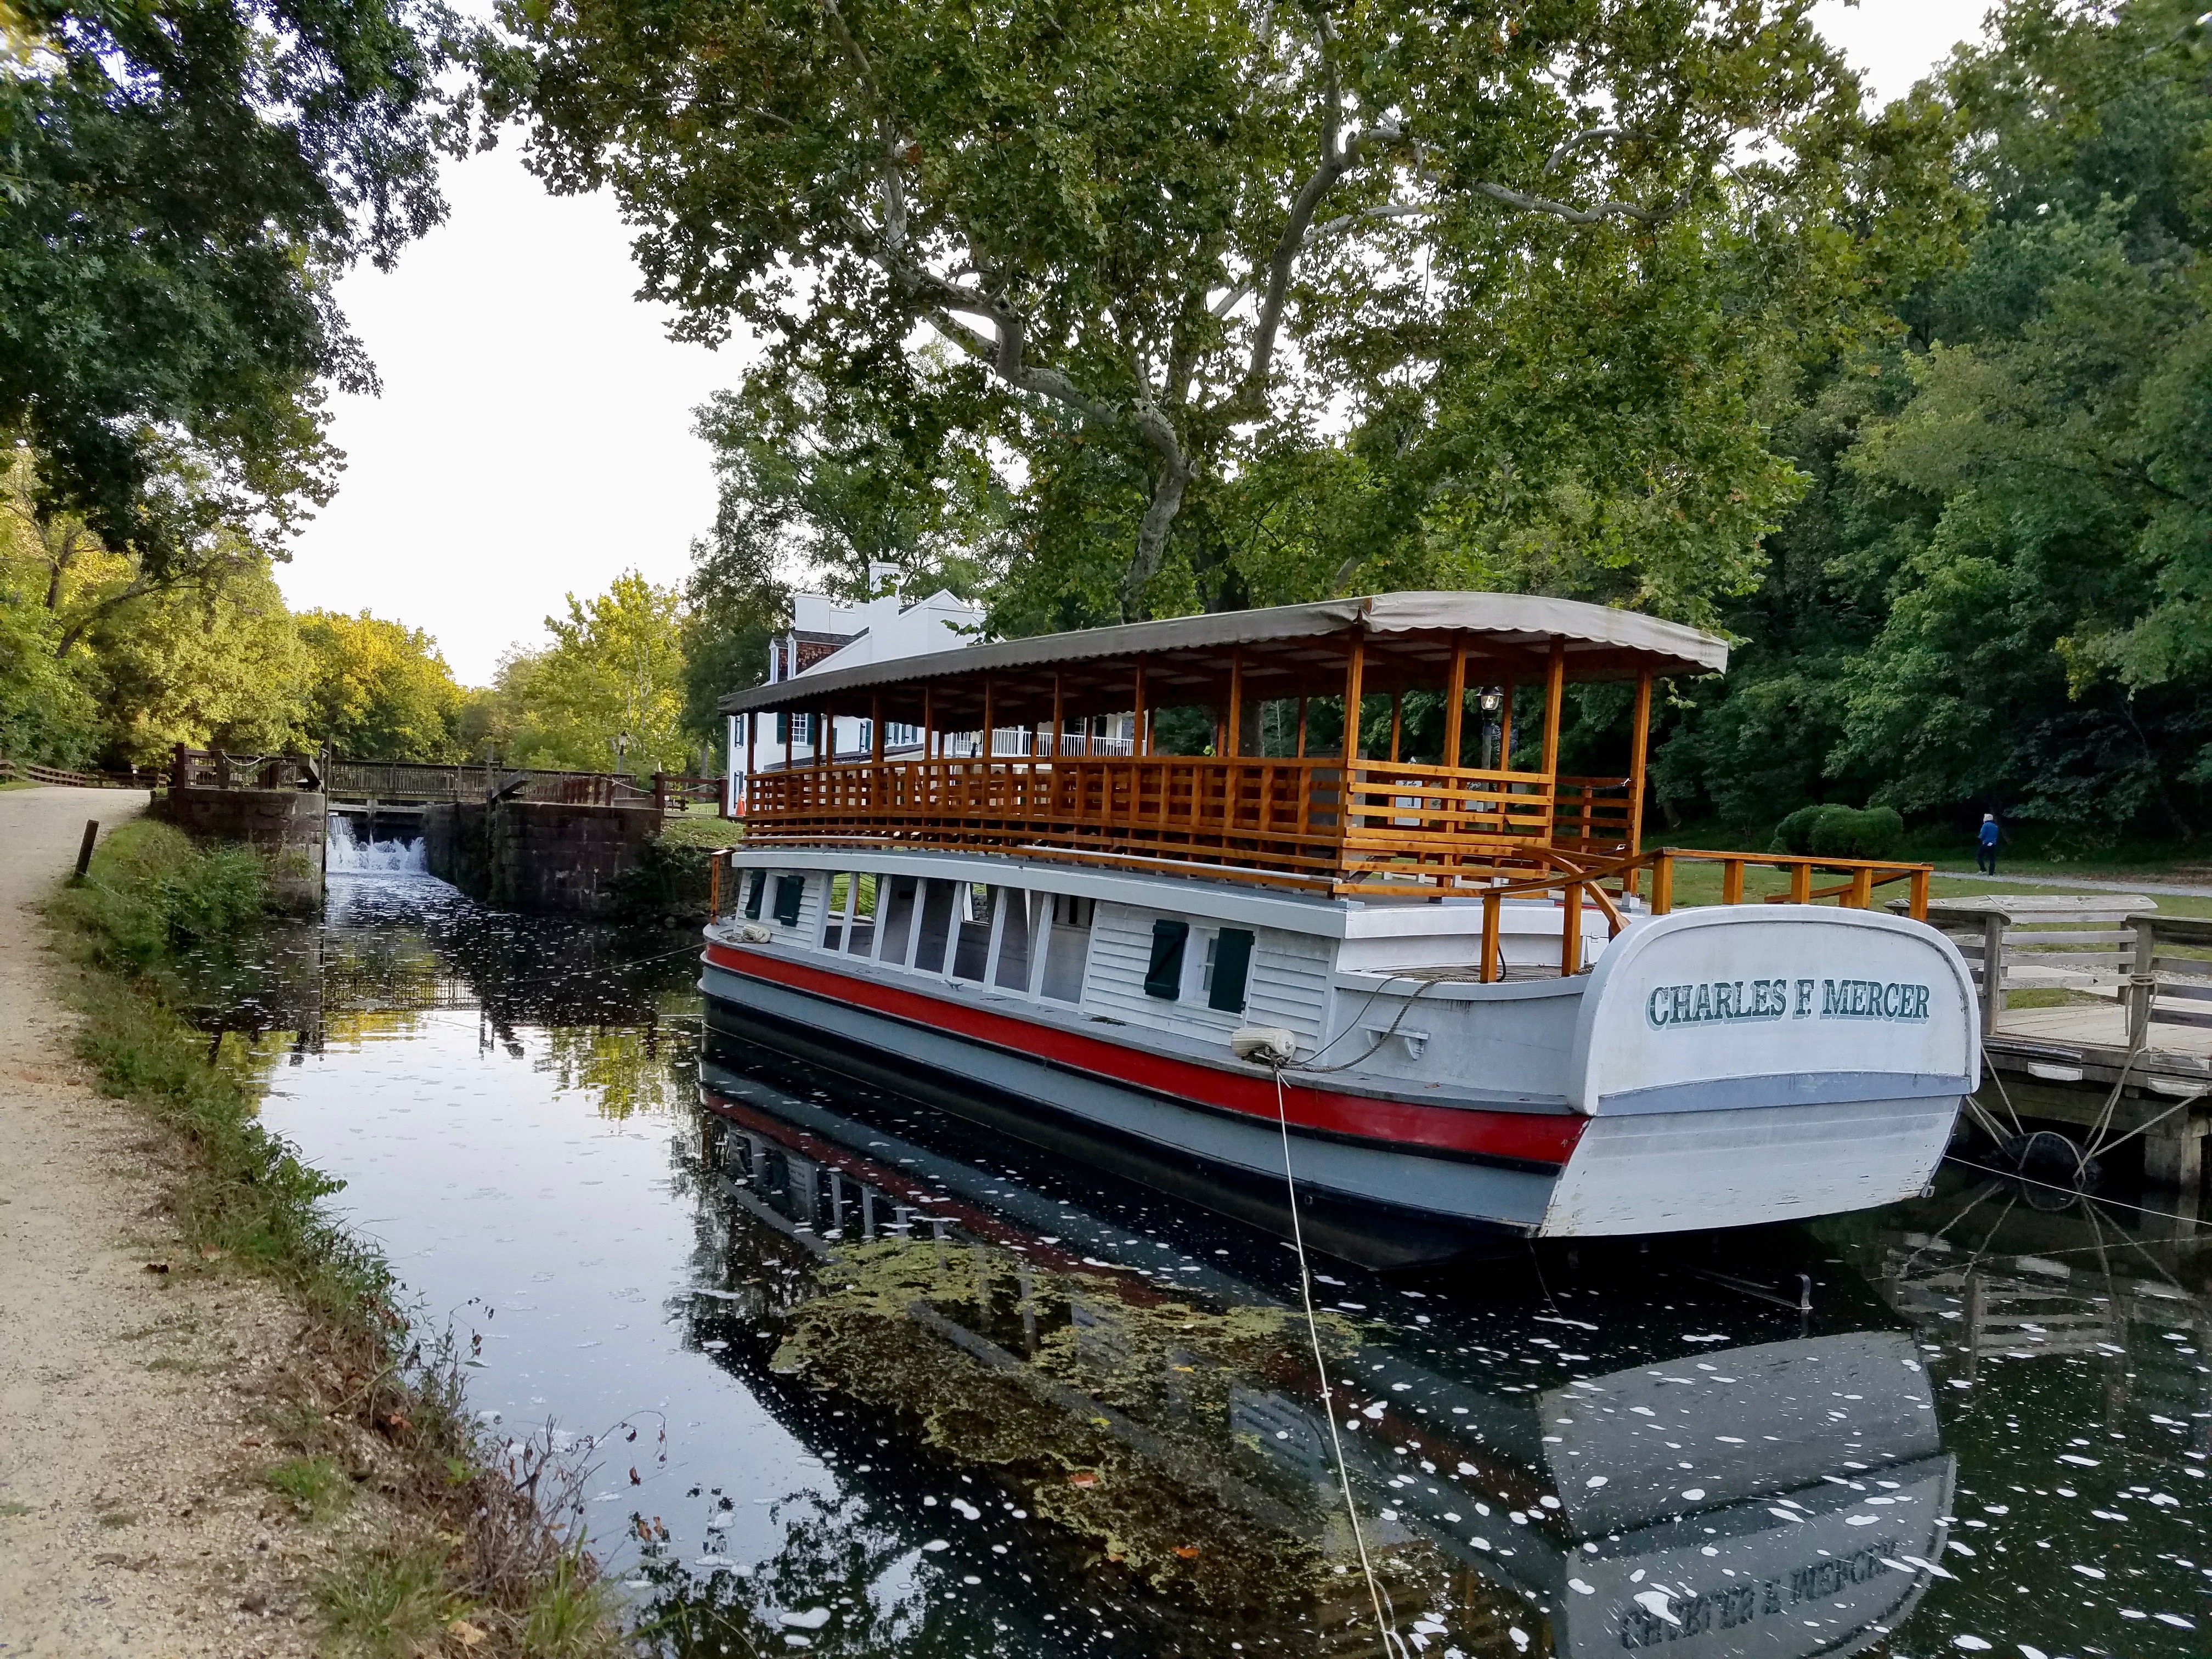 C&O Canal Boat